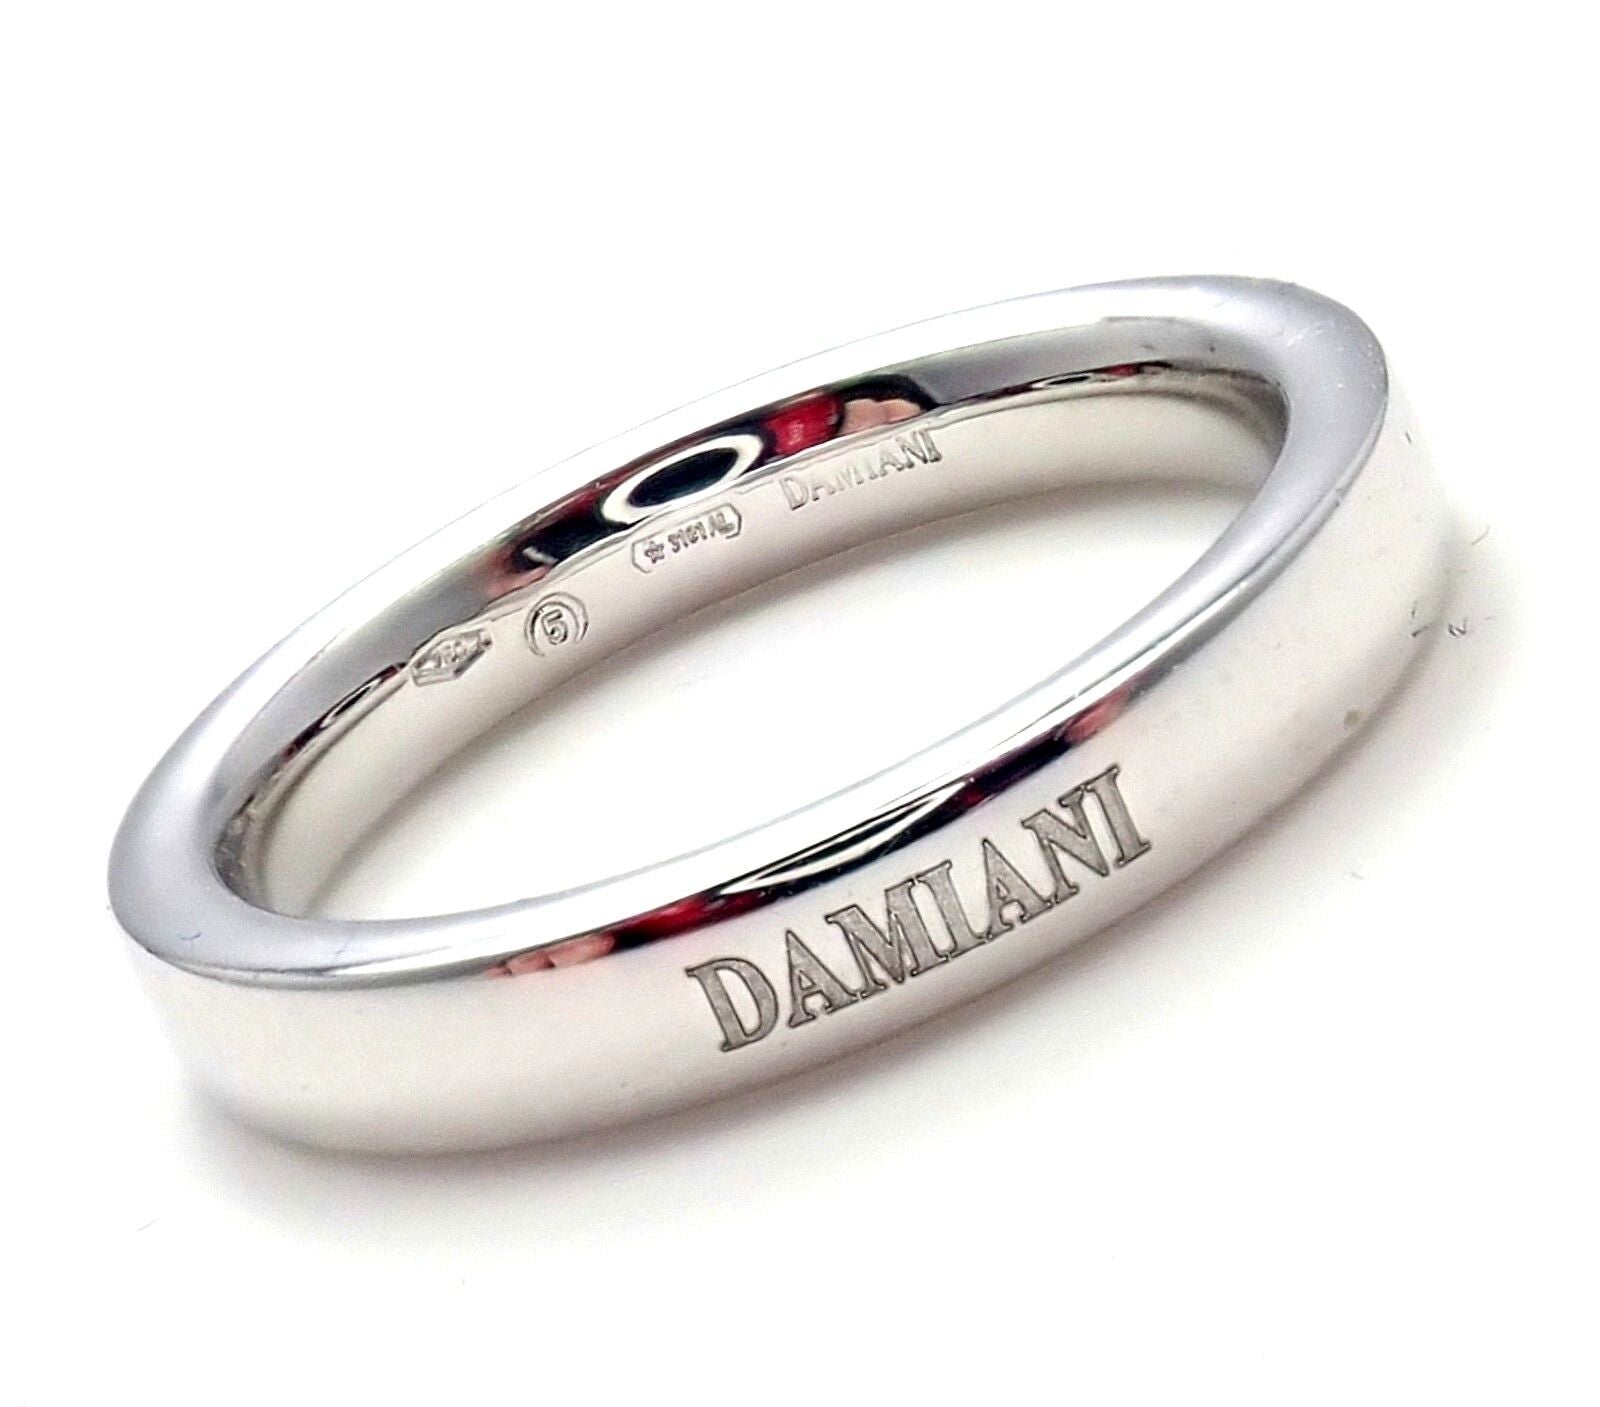 Damiani Jewelry & Watches:Vintage & Antique Jewelry:Rings New! Authentic Damiani 18k White Gold 3.5mm Band Ring Sz 7.5